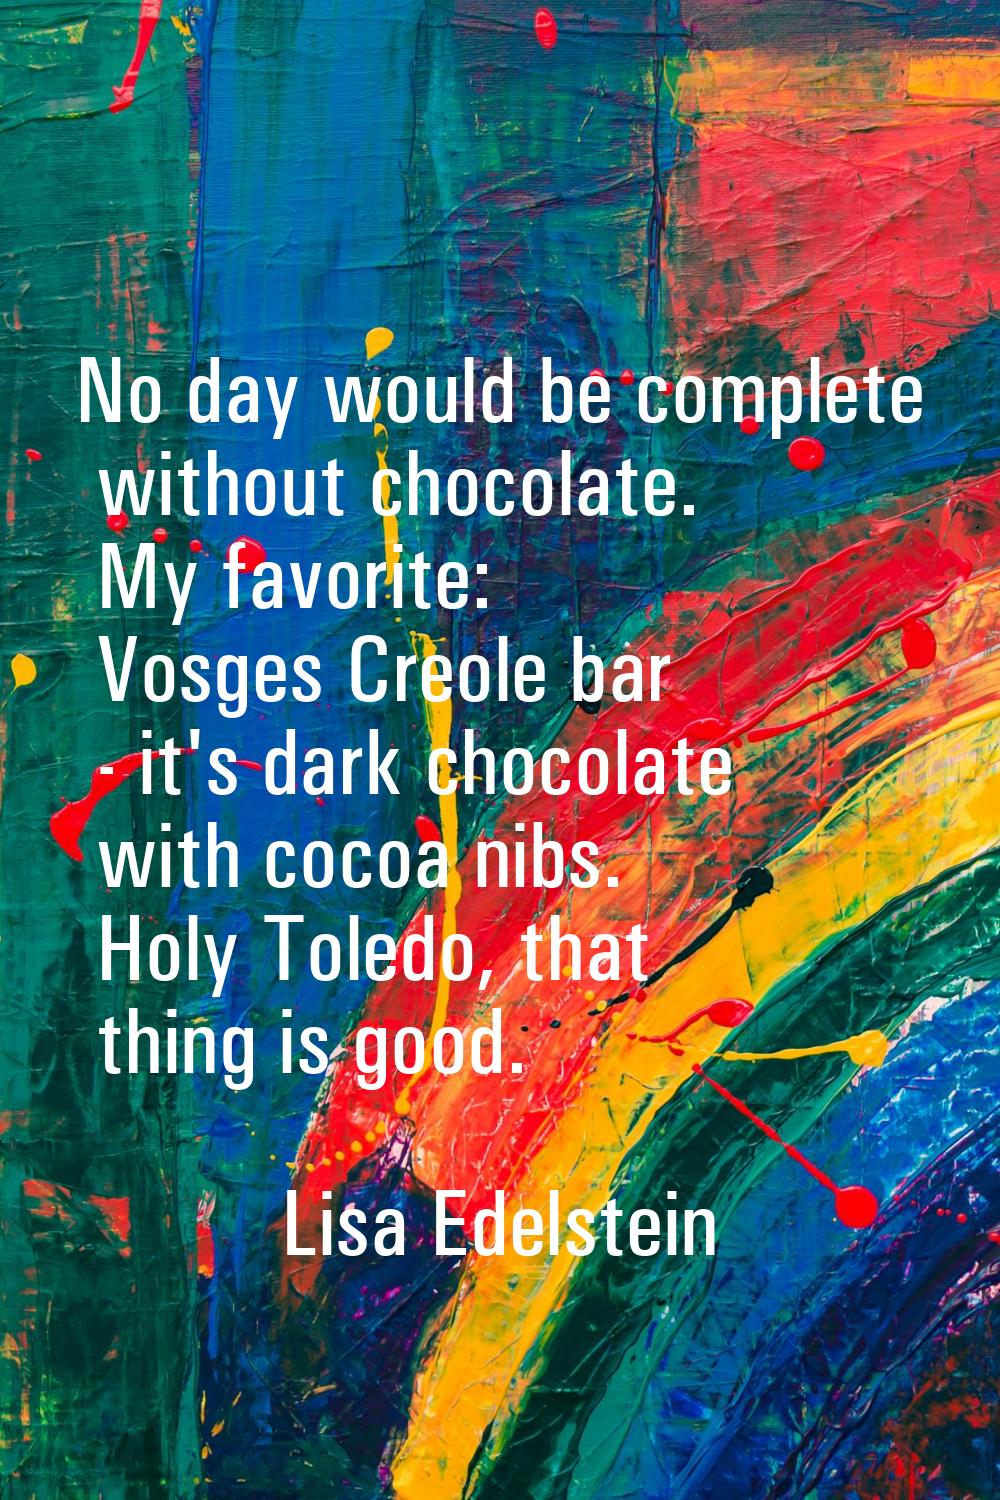 No day would be complete without chocolate. My favorite: Vosges Creole bar - it's dark chocolate wi